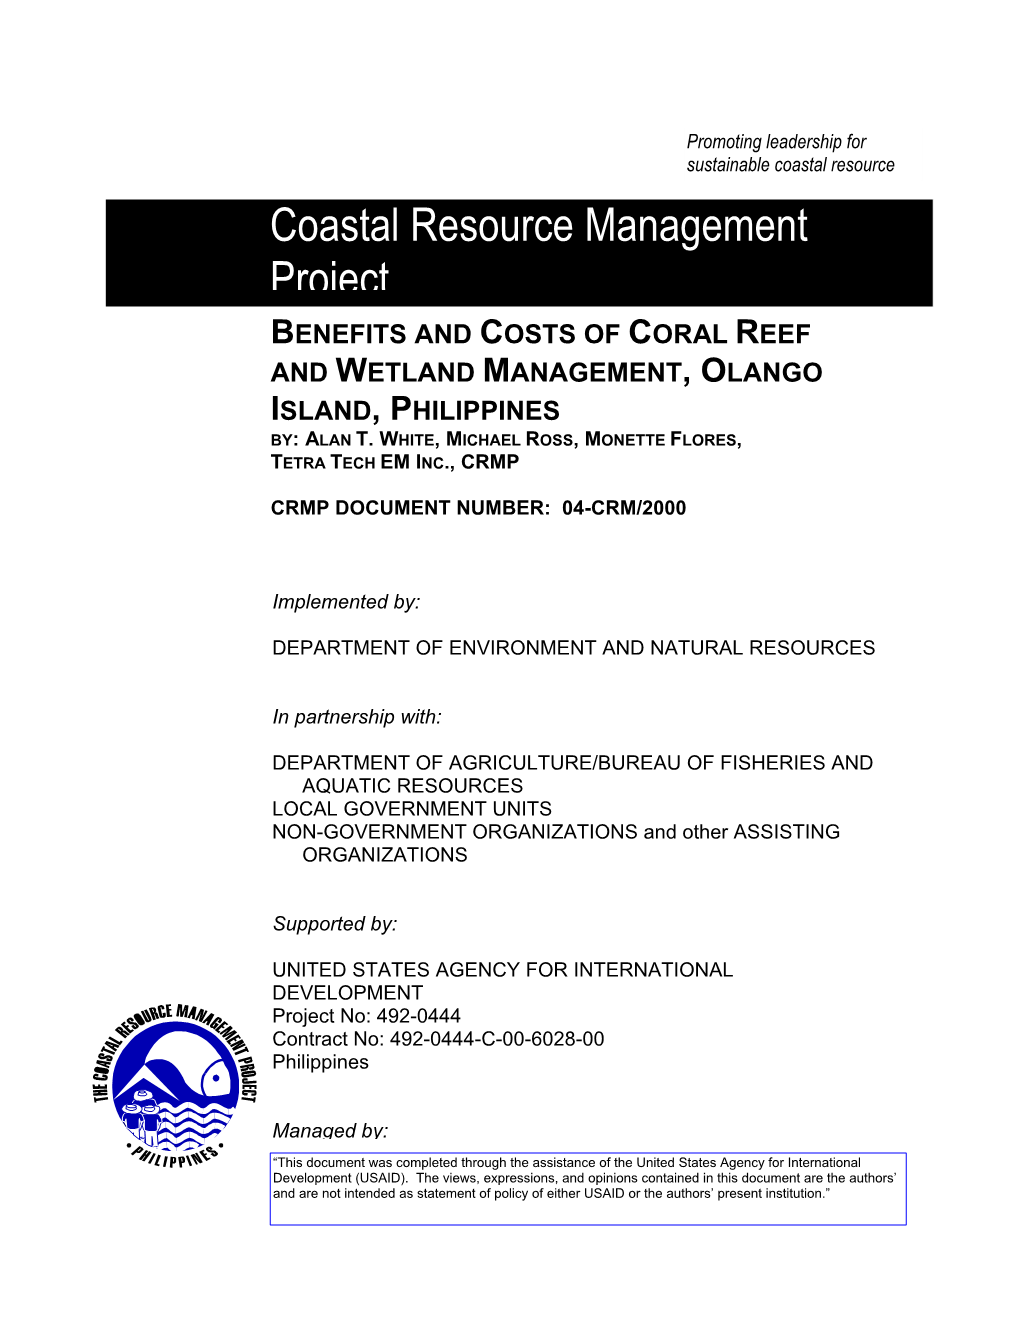 Coastal Resource Management Project BENEFITS and COSTS of CORAL REEF and WETLAND MANAGEMENT, OLANGO ISLAND, PHILIPPINES BY: ALAN T